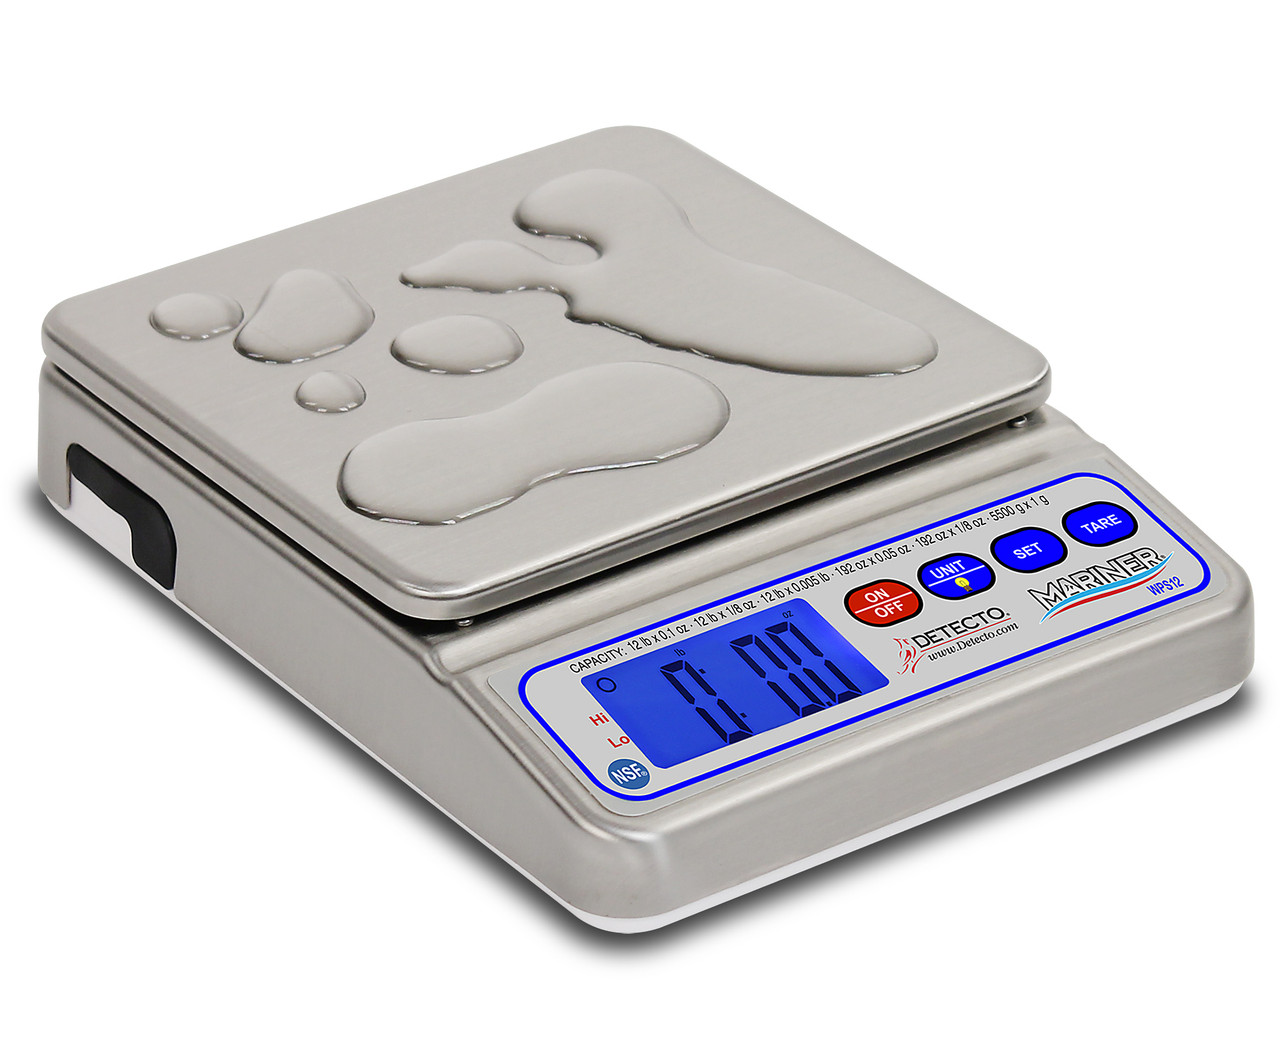 Detecto 6745 Digital Baby Scale, 30 lb x 0.1 oz, Pediatric Scale RS232 -  Scale Warehouse and More